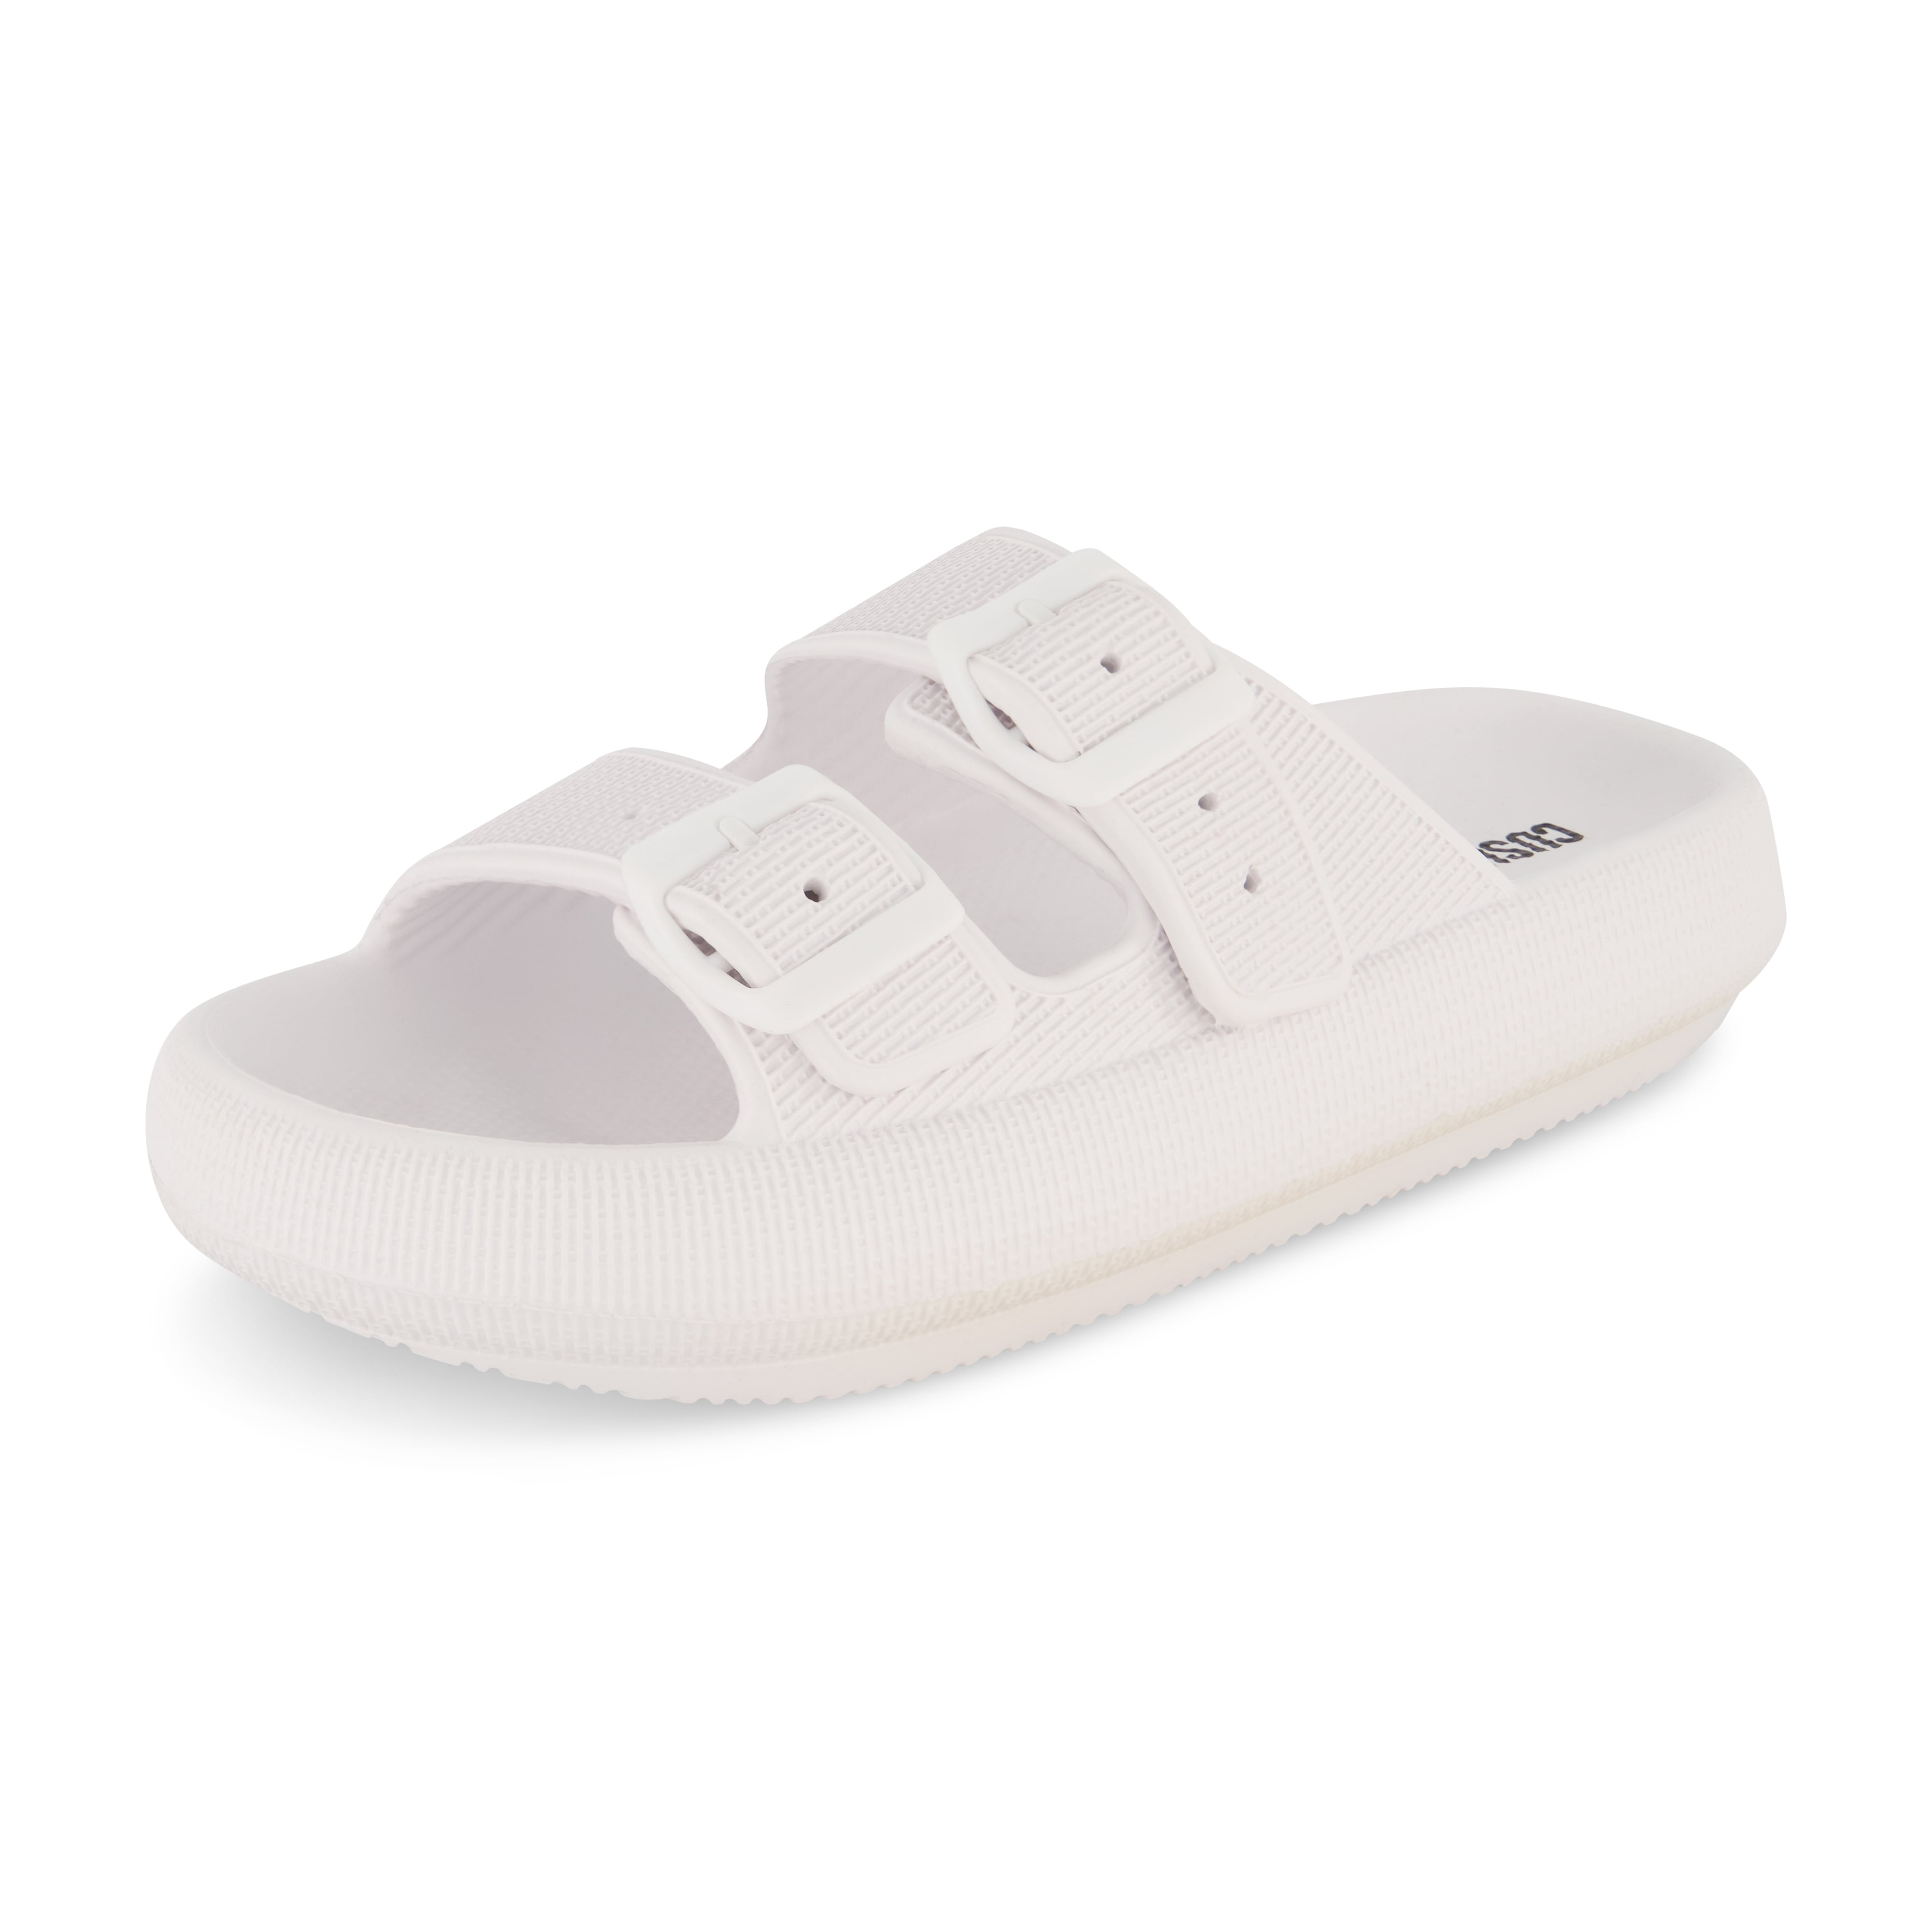 Cushionaire Women's Fame recovery cloud slide with +Comfort - Walmart.com